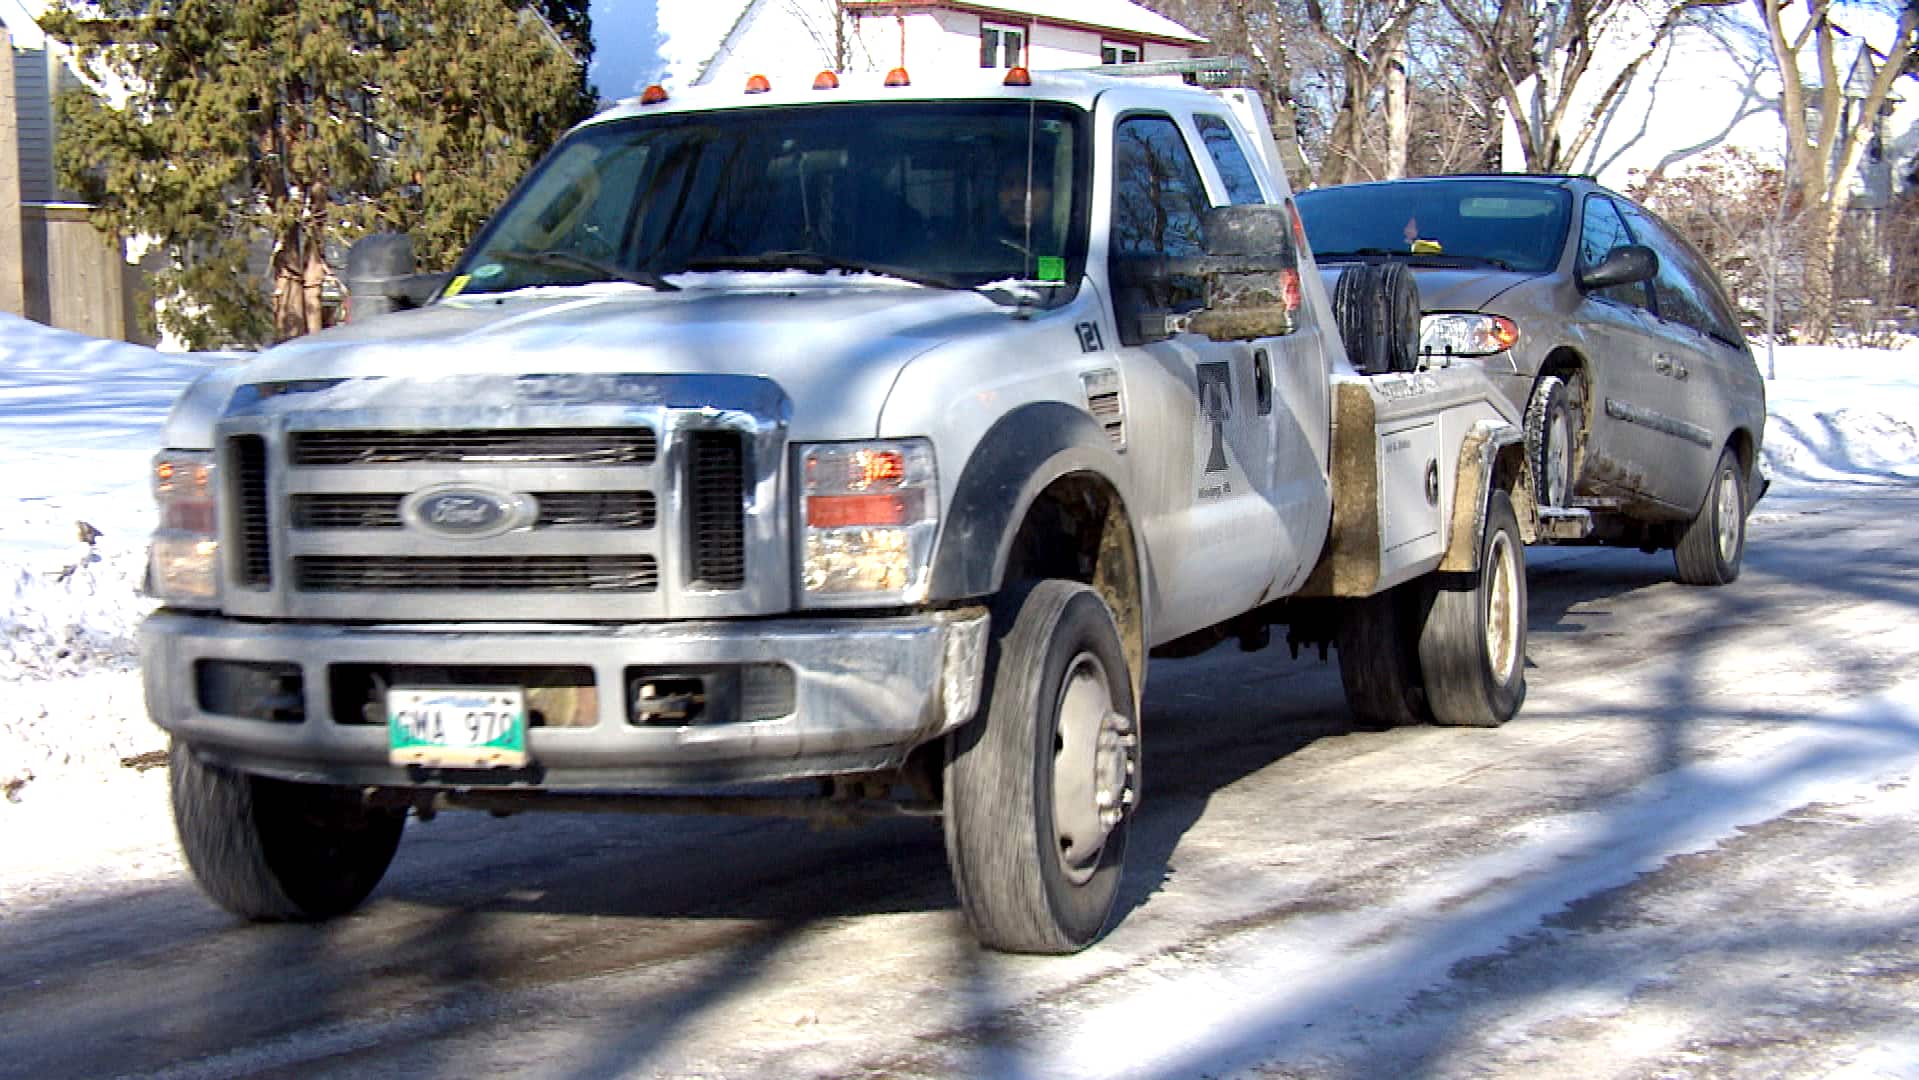 winnipeg towing company charges city 1 1m for tows that never happened report claims